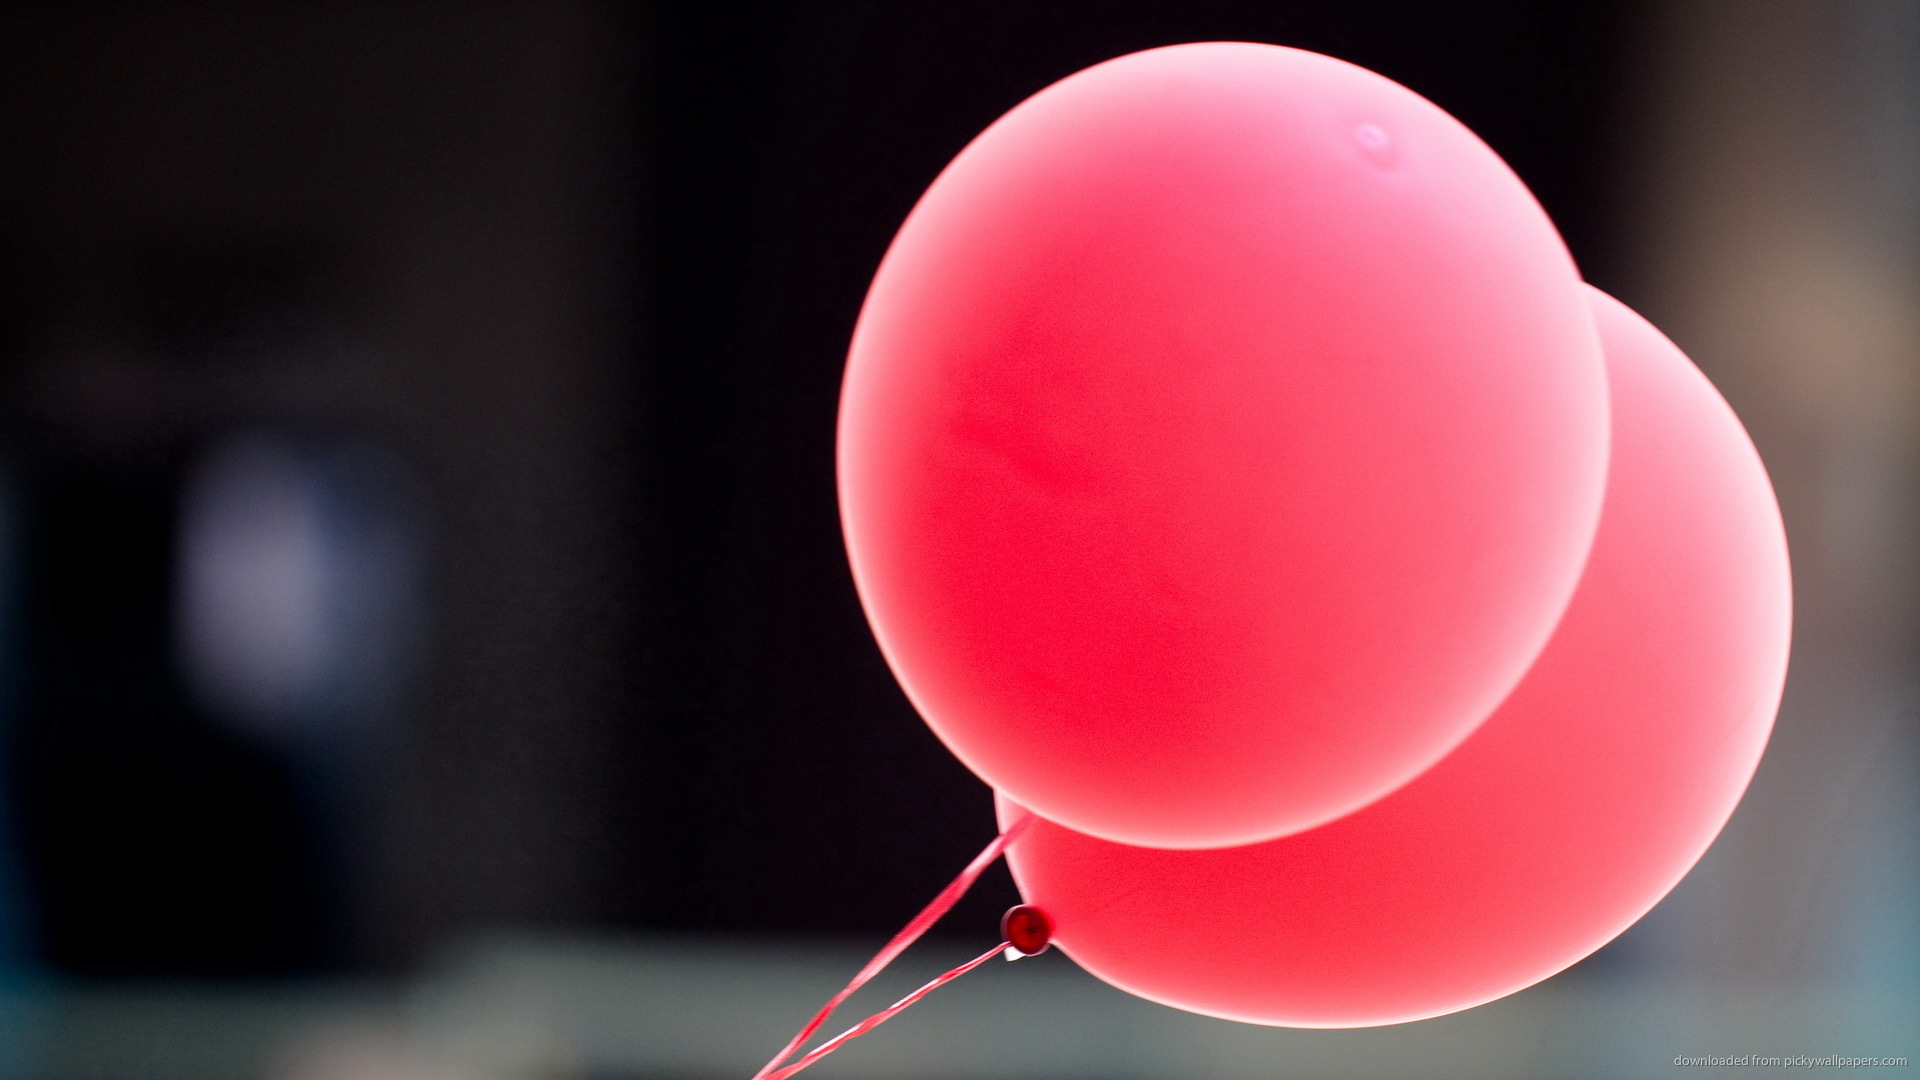 Download Two Pink Balloons Wallpaper 1920x1080px